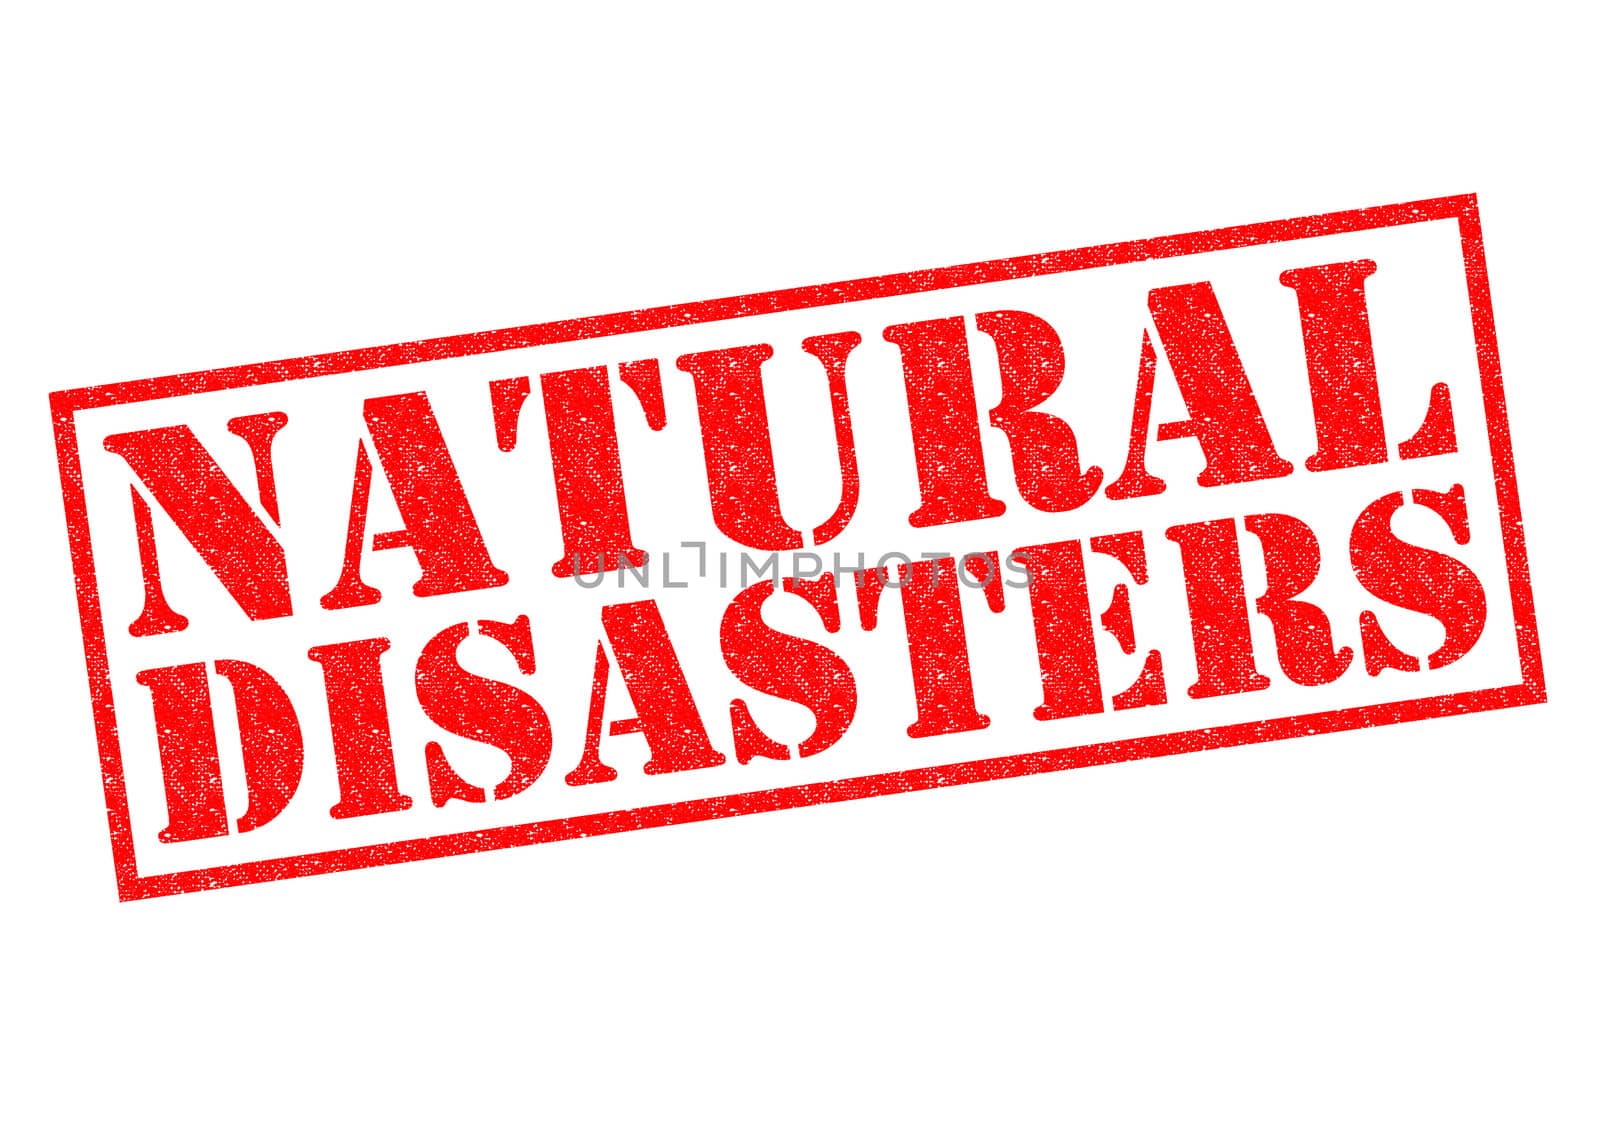 NATURAL DISASTERS red Rubber Stamp over a white background.